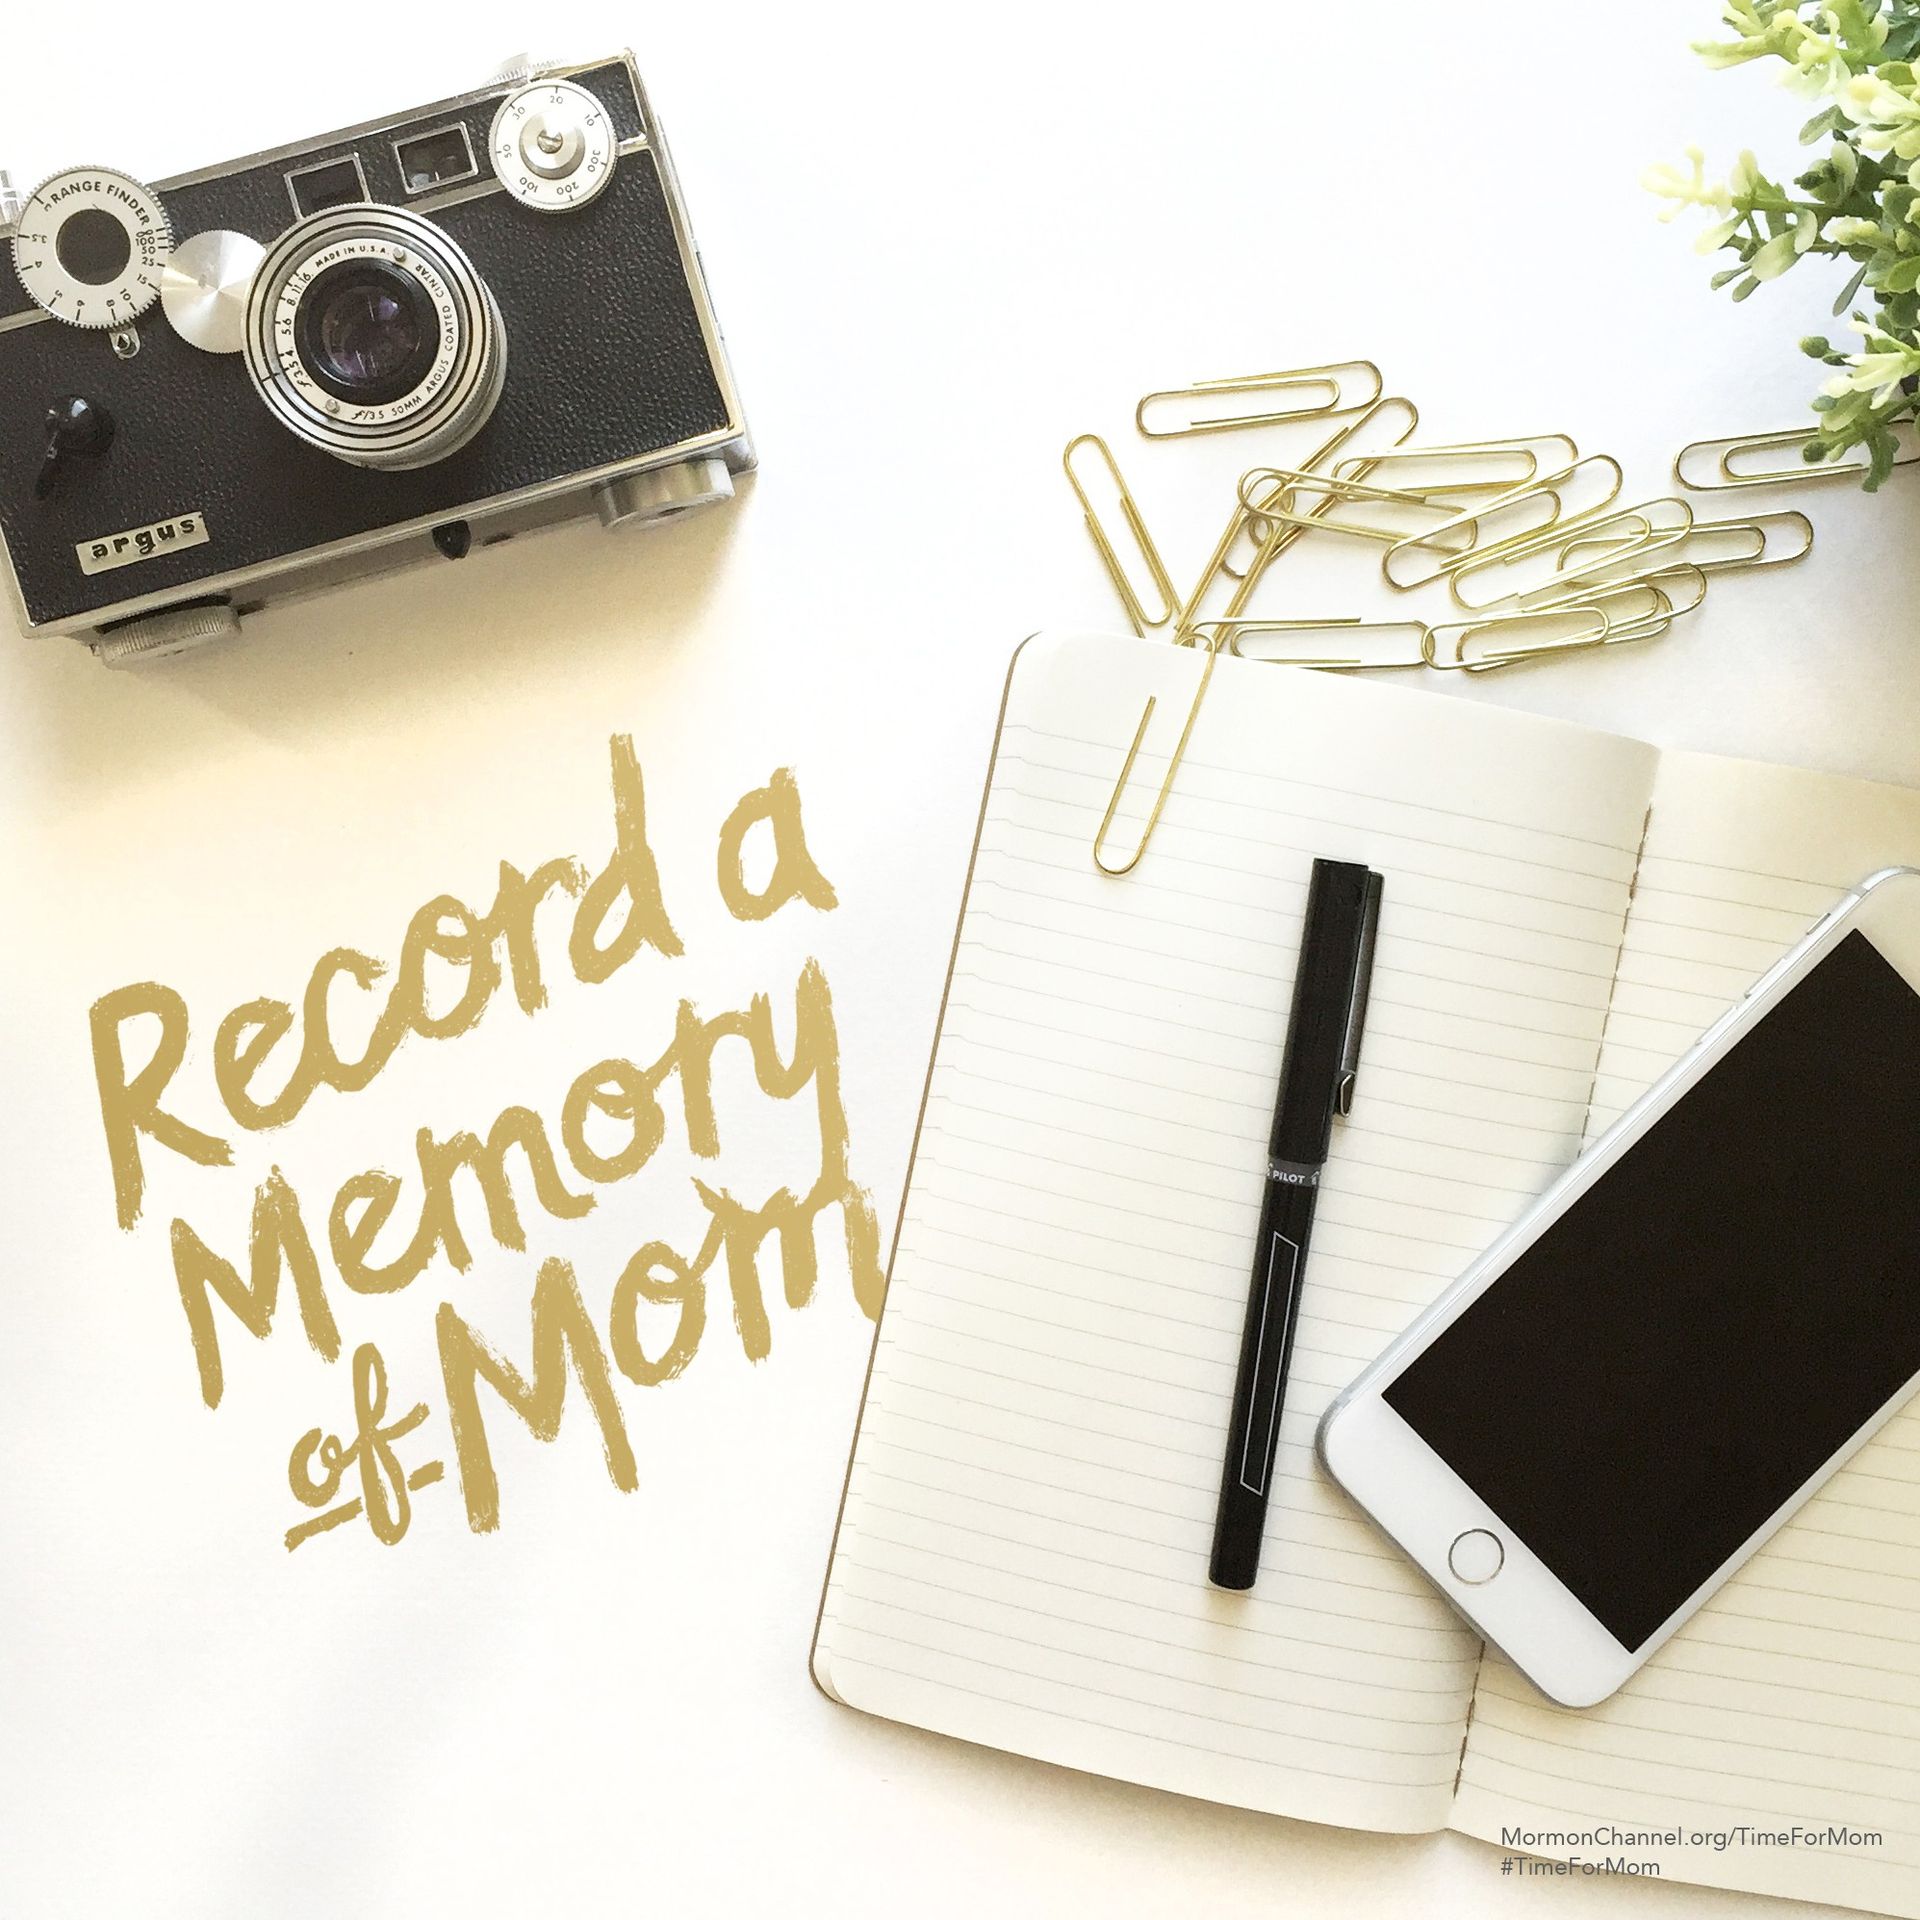 Record a memory of Mom. Find out how to make #TimeForMom here.